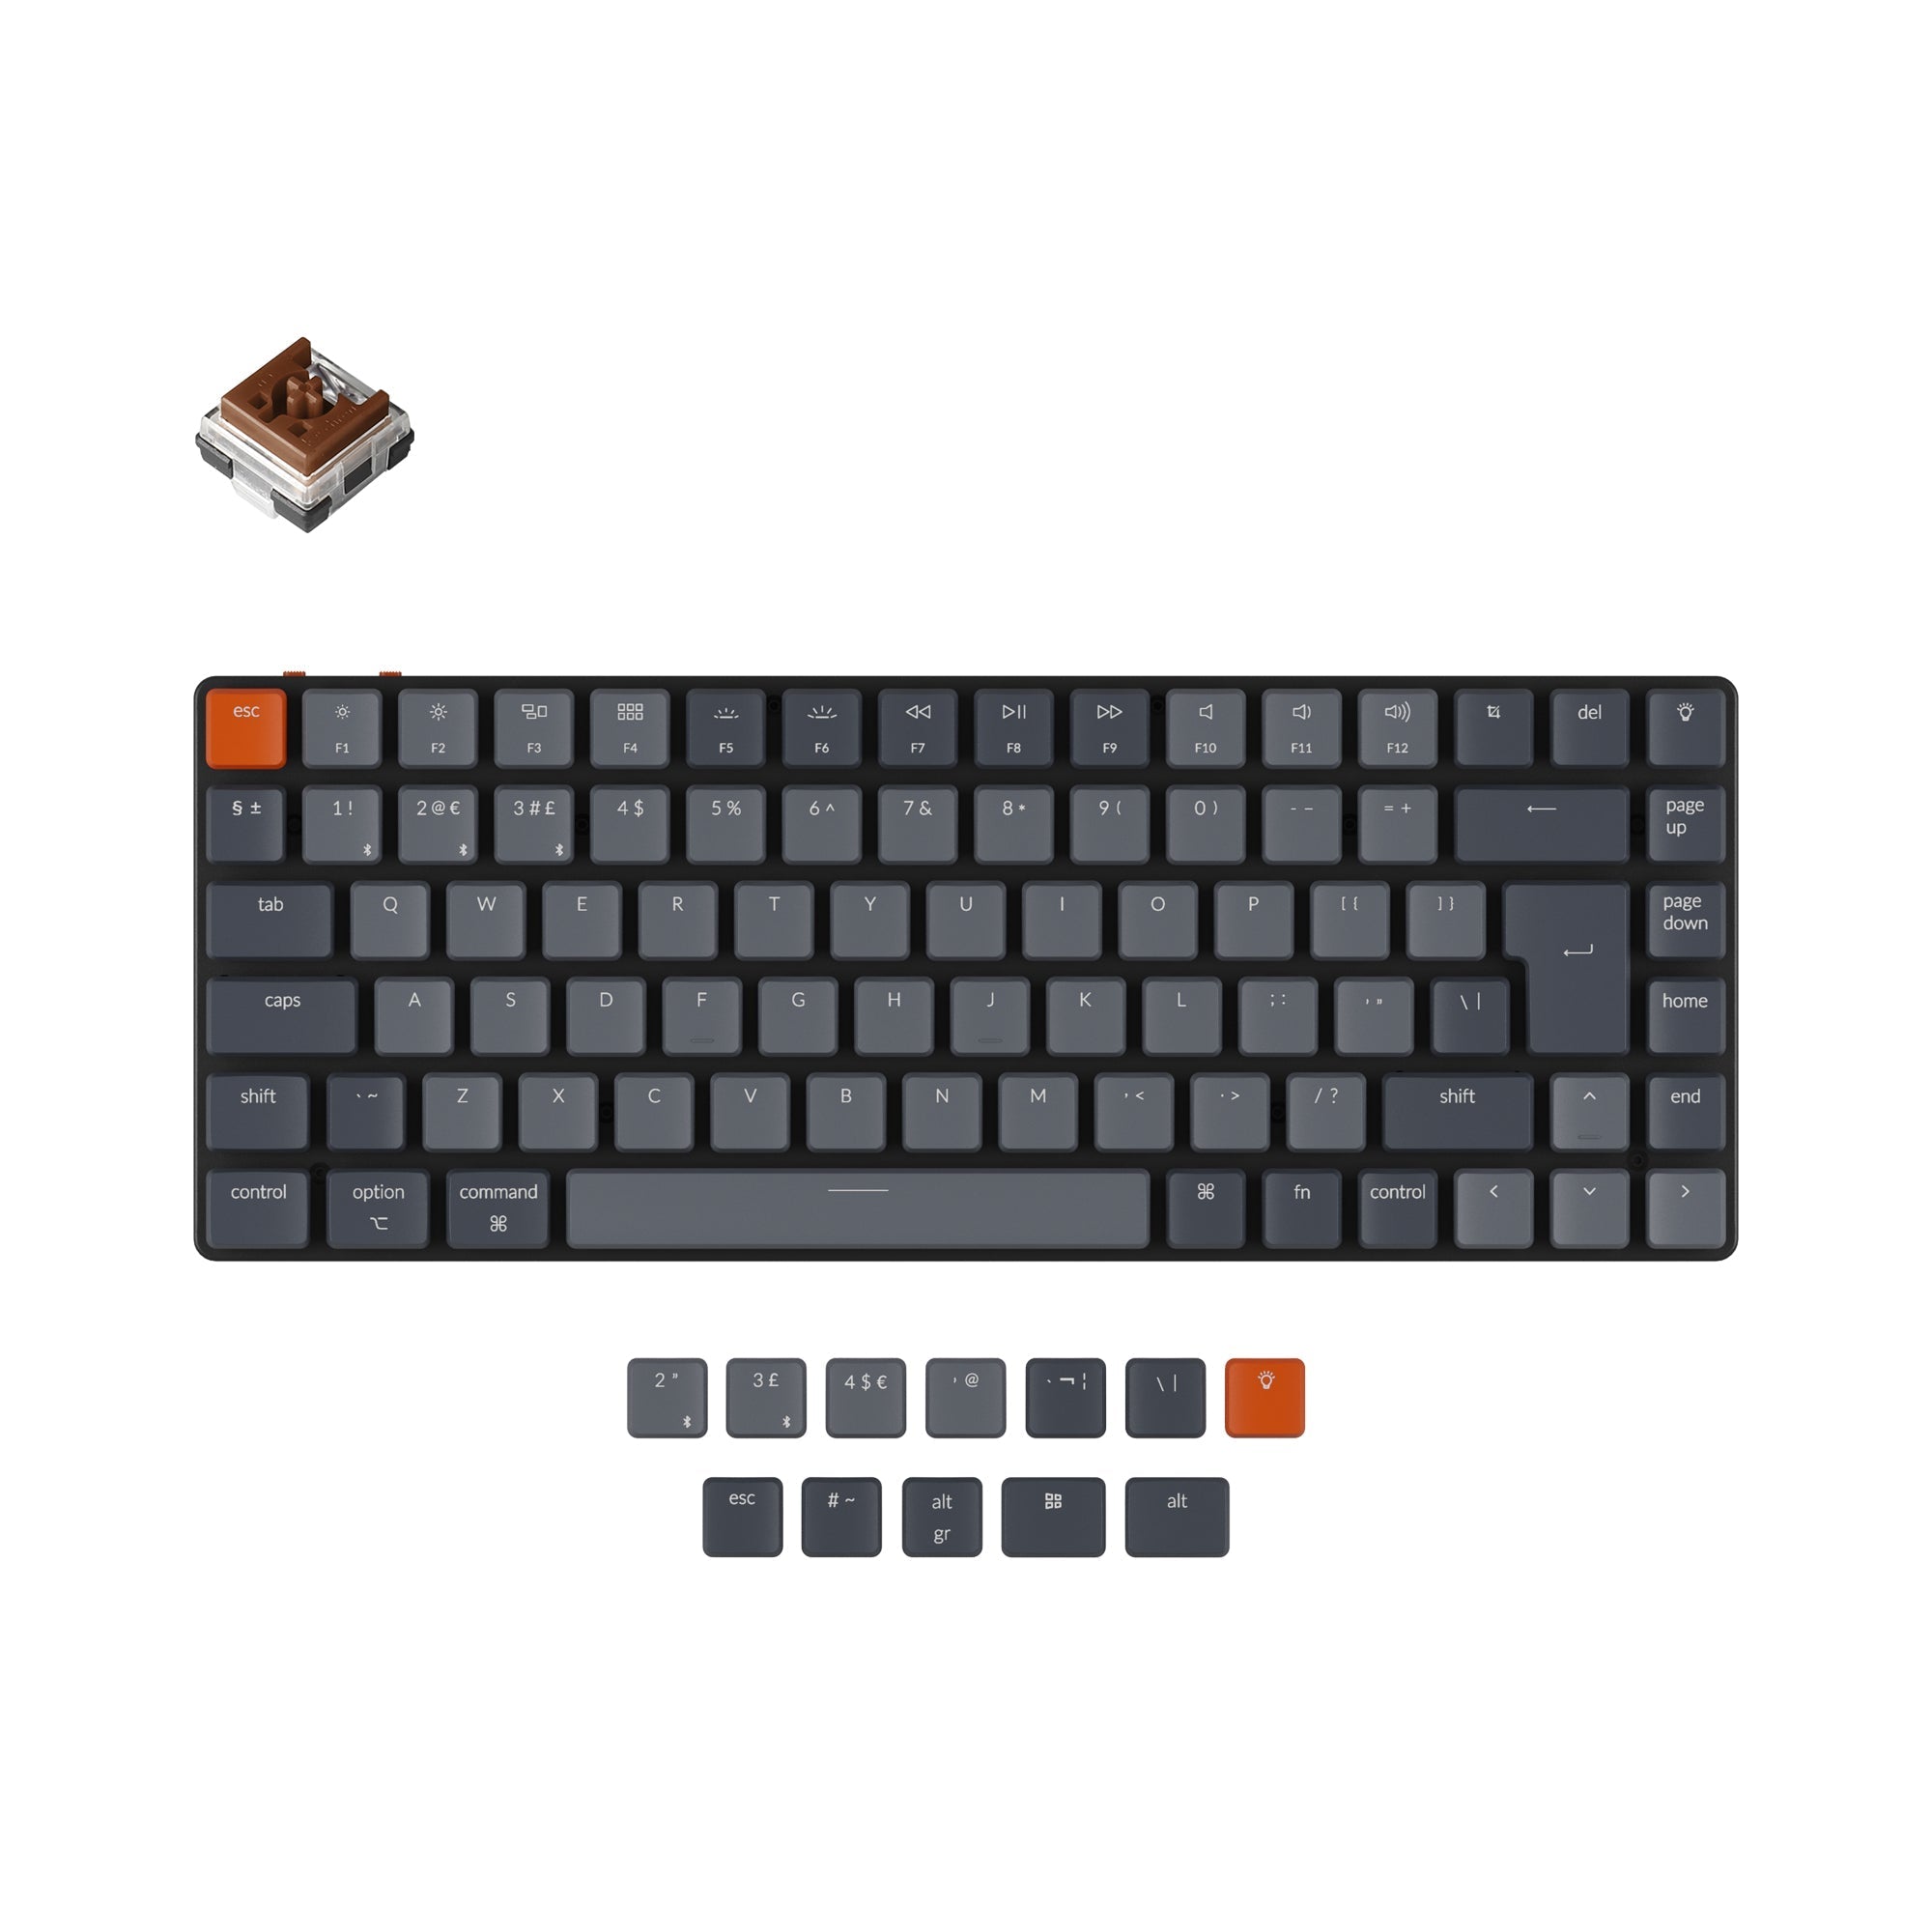 Keychron K3 ultra slim Hot swappable wireless mechanical keyboard Mac Windows iOS Android White backlight aluminum frame low profile Keychron Optical switch brown uk iso layout